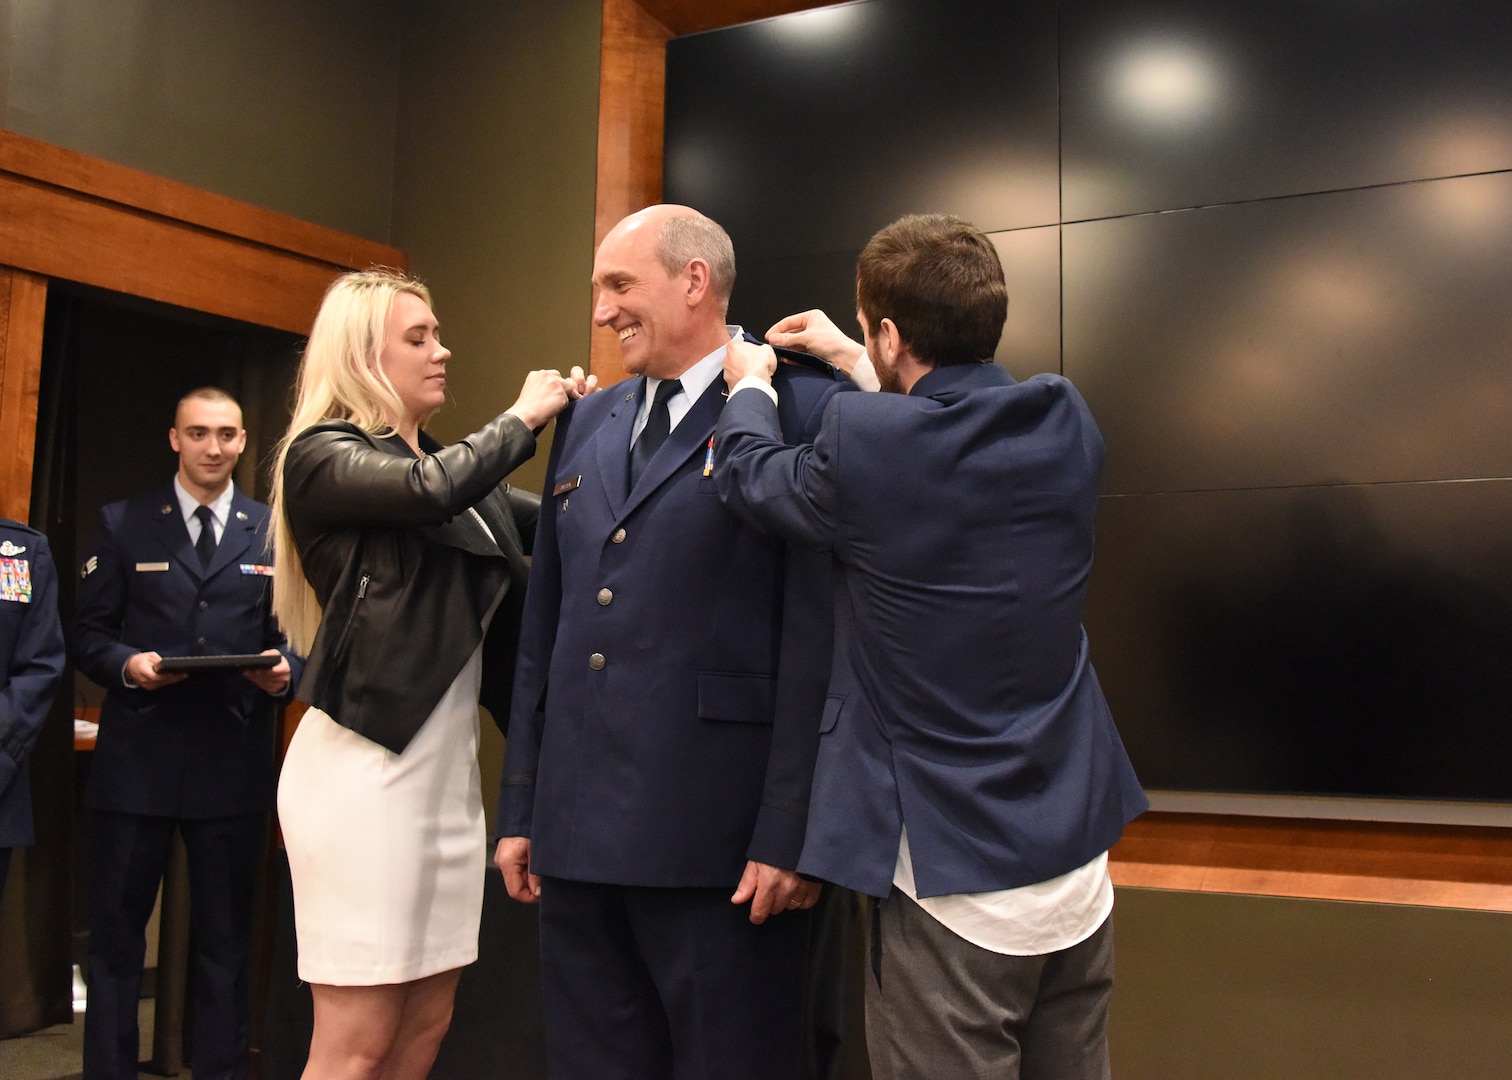 Daughter, Monica and son, Alex, pin eagles on newly promoted Illinois Air National Guard Col. William Miller, Director of Staff-Air, during a promotion ceremony March 8 at the Illinois Military Academy, Camp Lincoln, Springfield, Illinois.